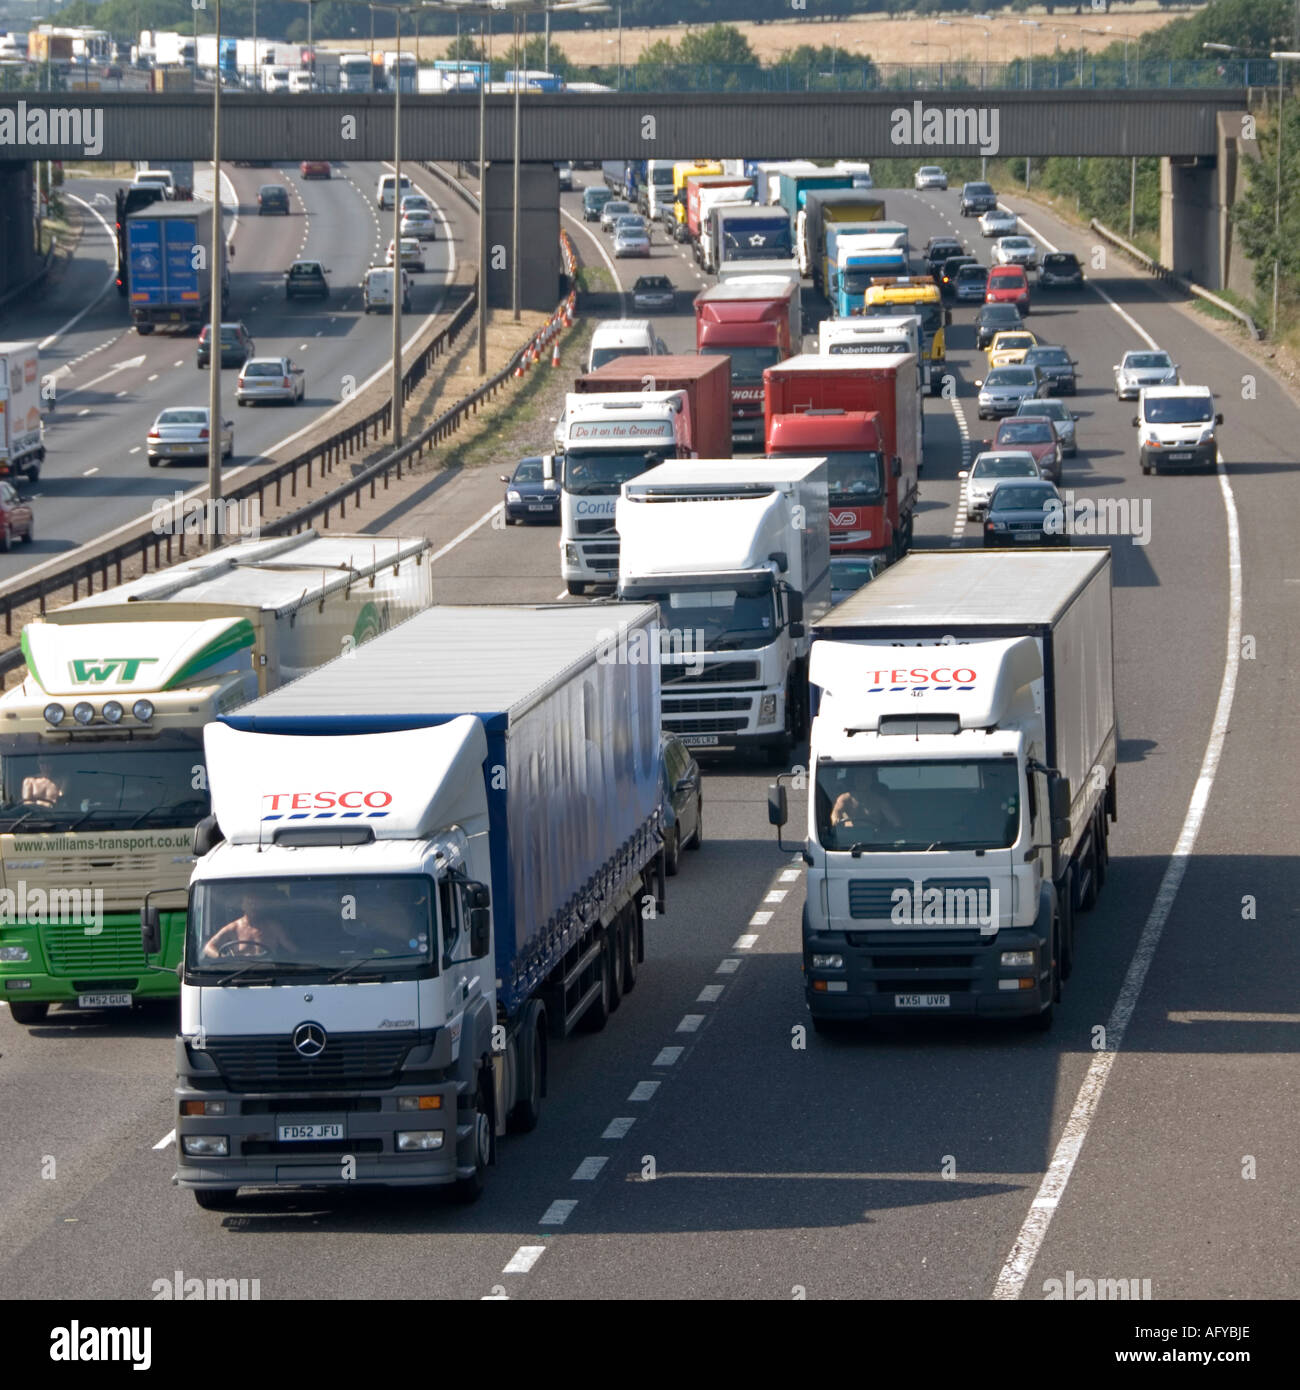 Brentwood M25 motorway junction 28 slip road heavy lorries stuck in tailback including two Tesco supermarket supply chain hgv lorry & truck drivers UK Stock Photo